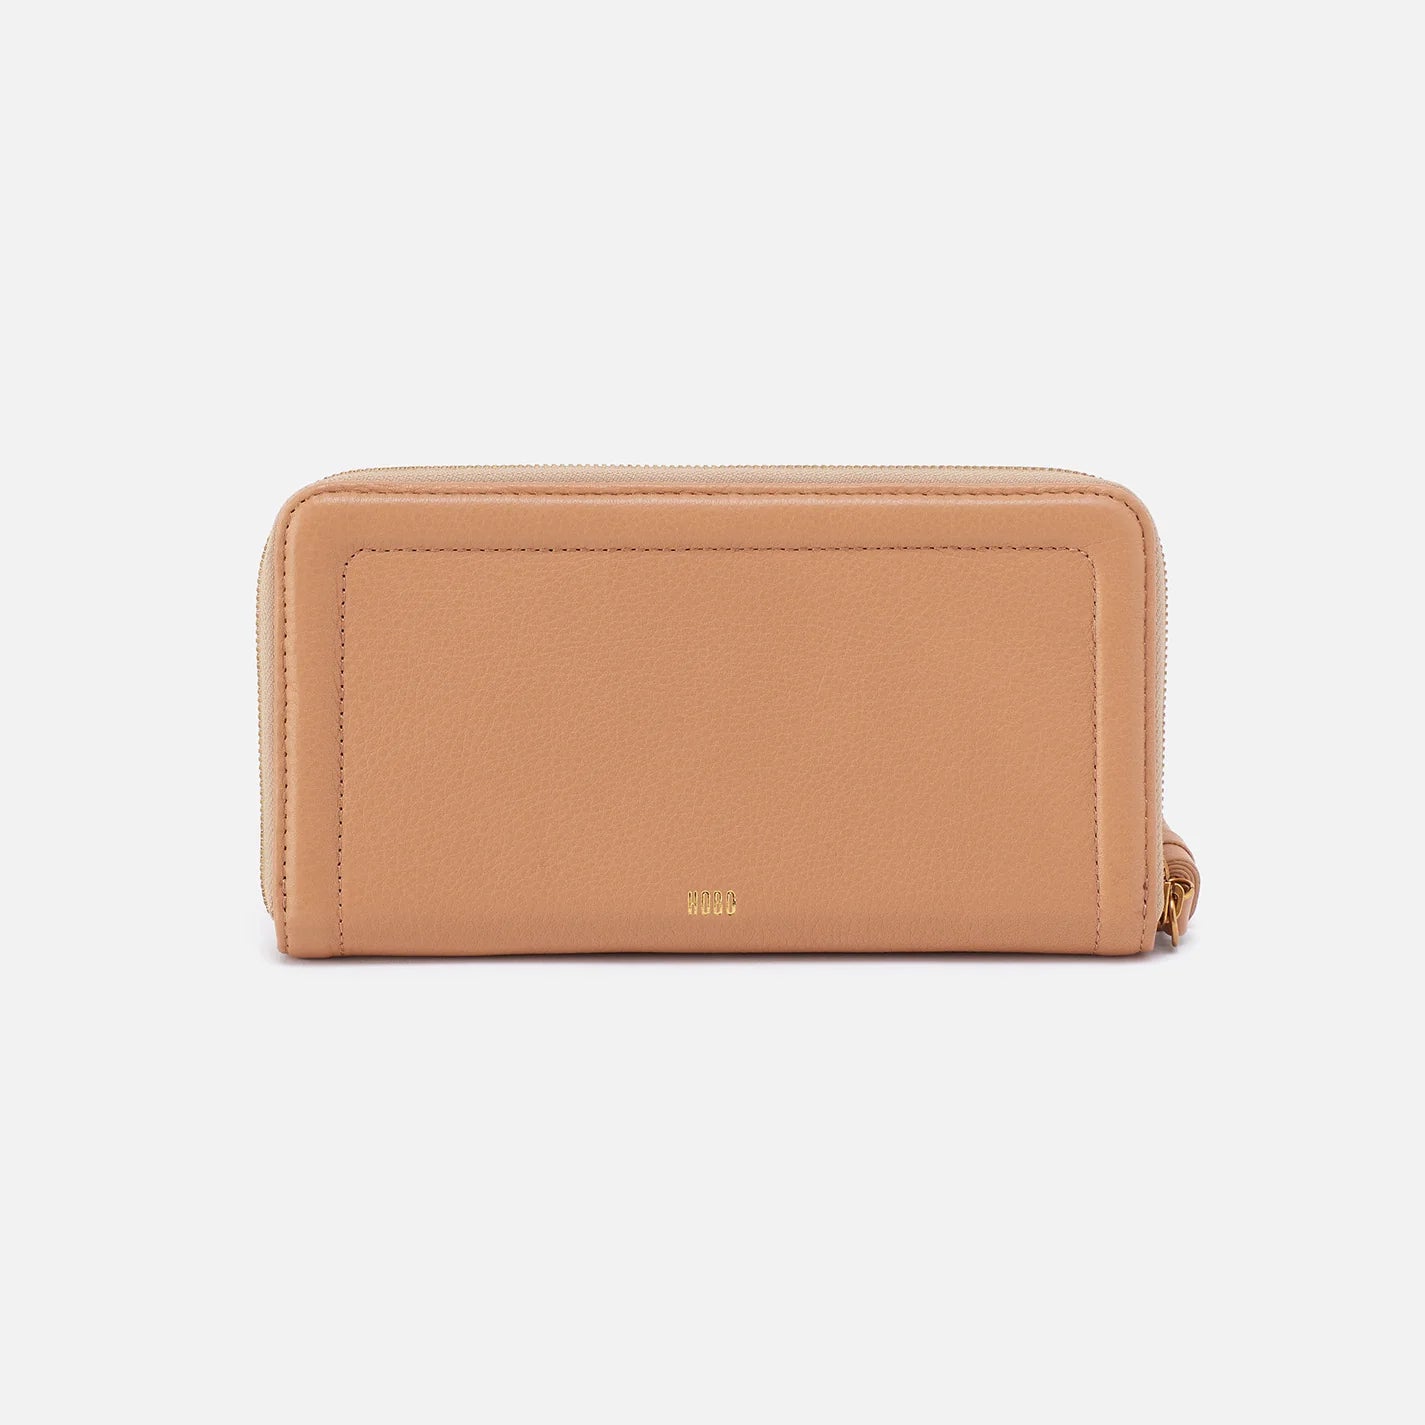 The Nila Large Zip Around Wallet in sandstorm is a continental design with interior organization for your cash and cards and a leather tassel zipper for added style and functionality. Available at the Painted Cottage in Edgewater, MD